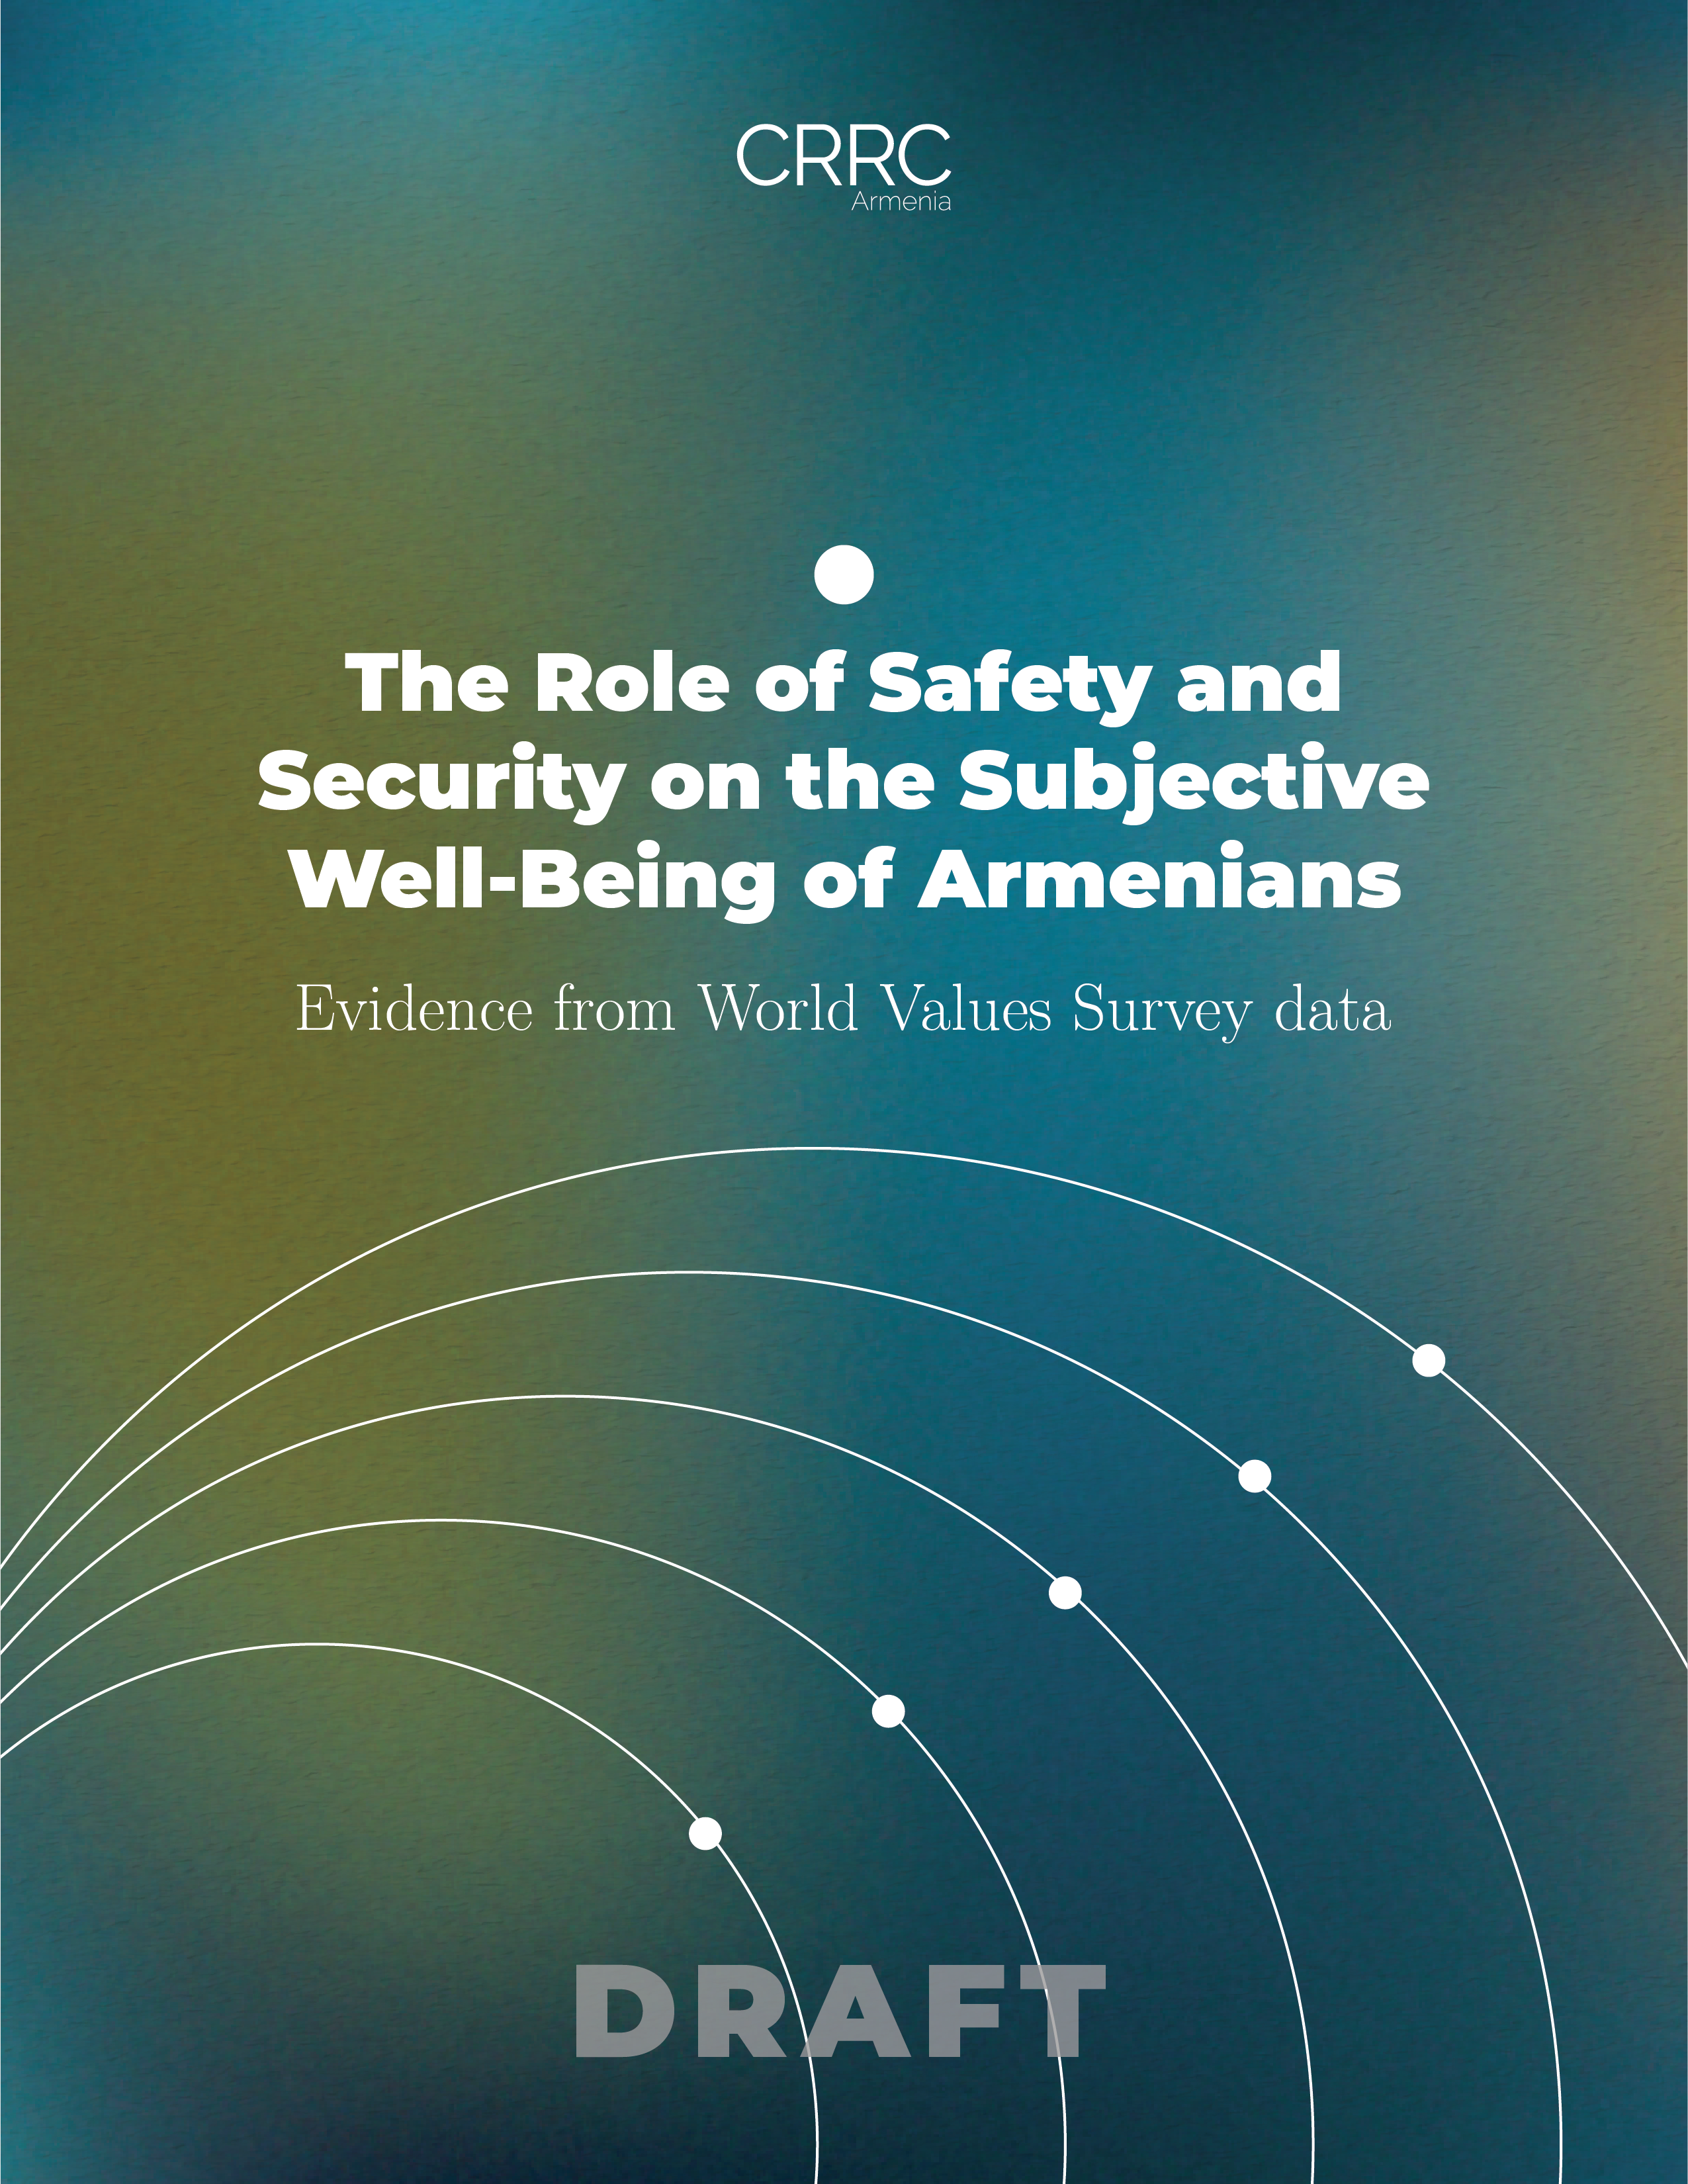 The Role of Safety and Security on the Subjective Well-Being of Armenians: Evidence from World Values Survey Data